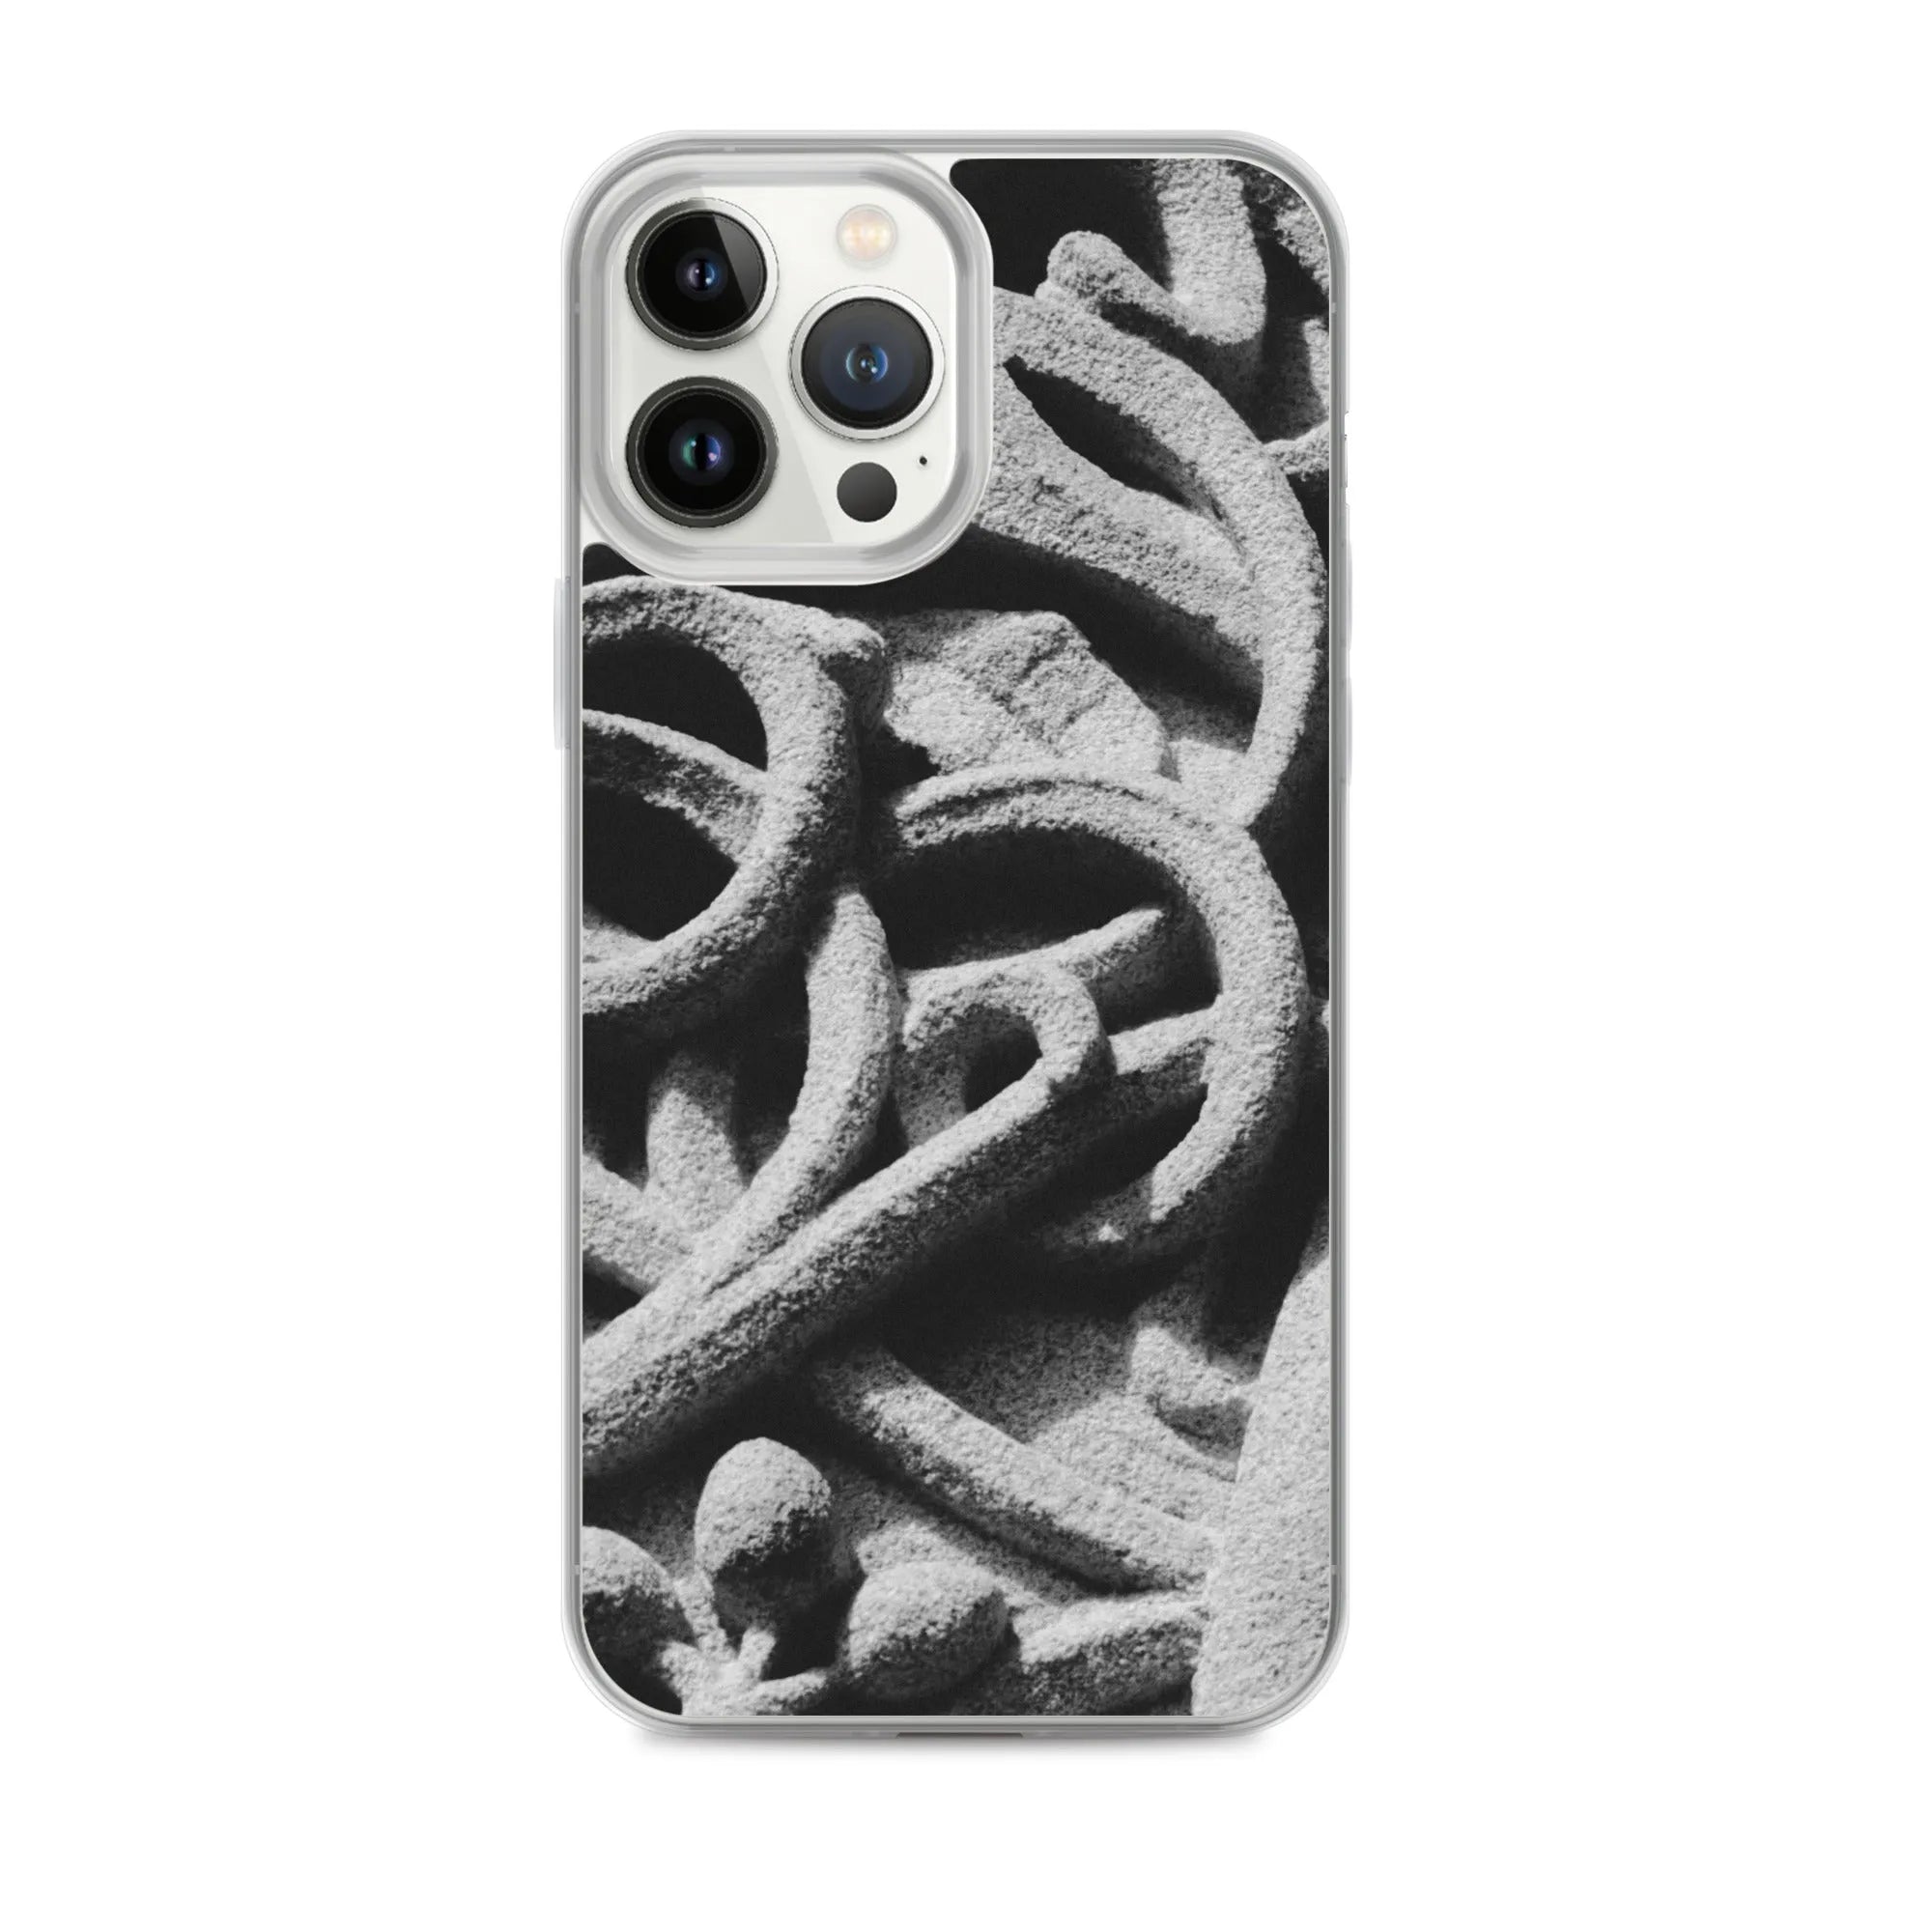 Labyrinth - Designer Travels Art Iphone Case - Black And White - Iphone 13 Pro Max - Mobile Phone Cases - Aesthetic Art